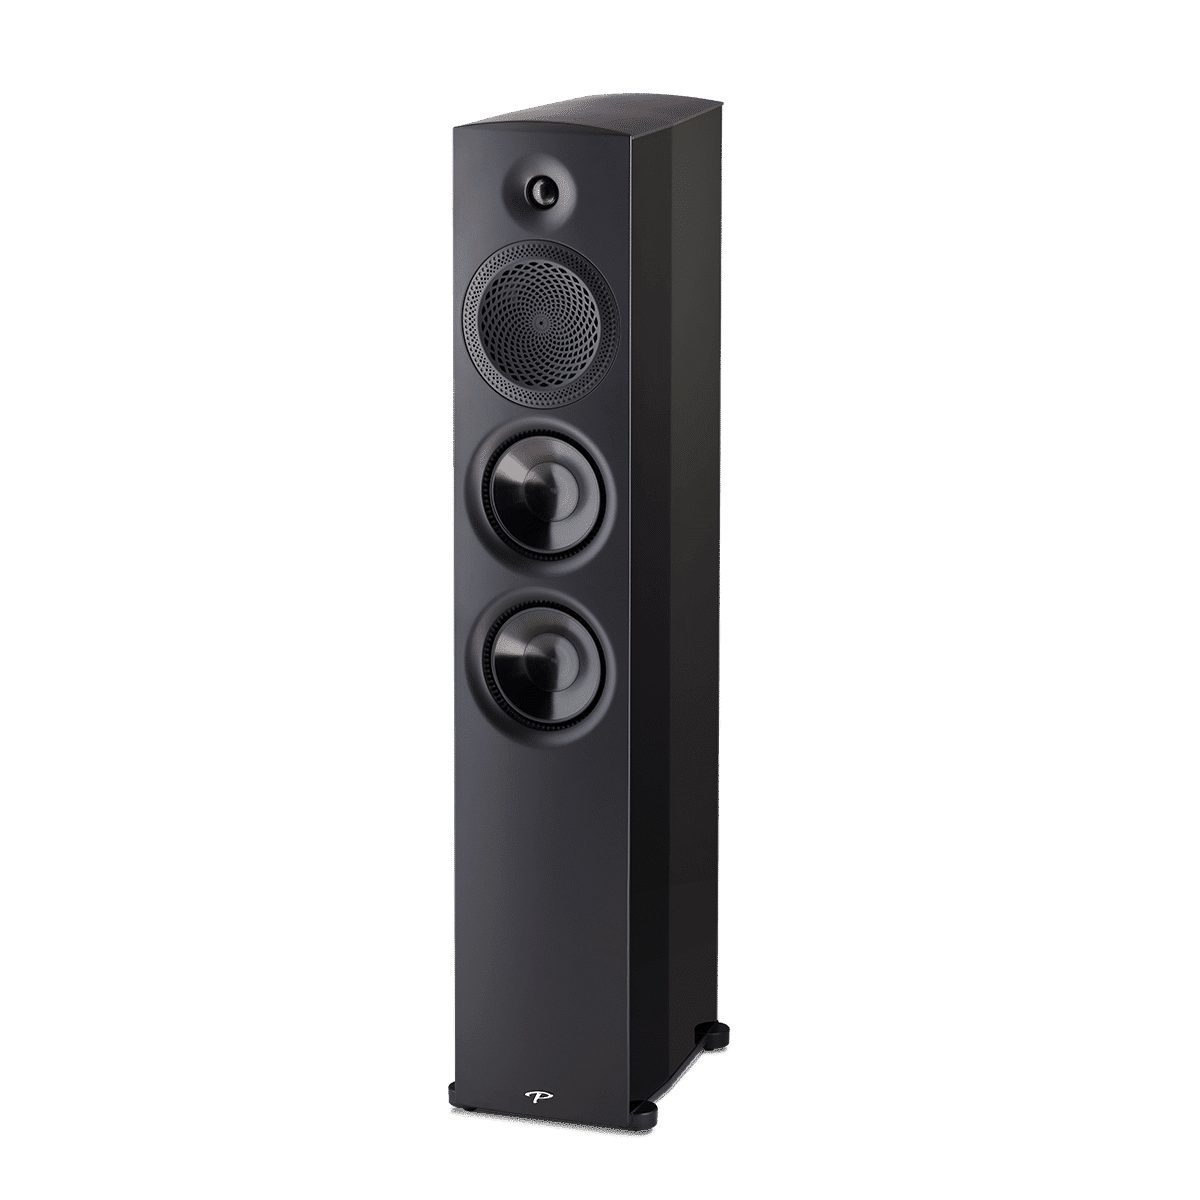 Paradigm Premier 800F Floor Standing Speakers black front angled view without gril